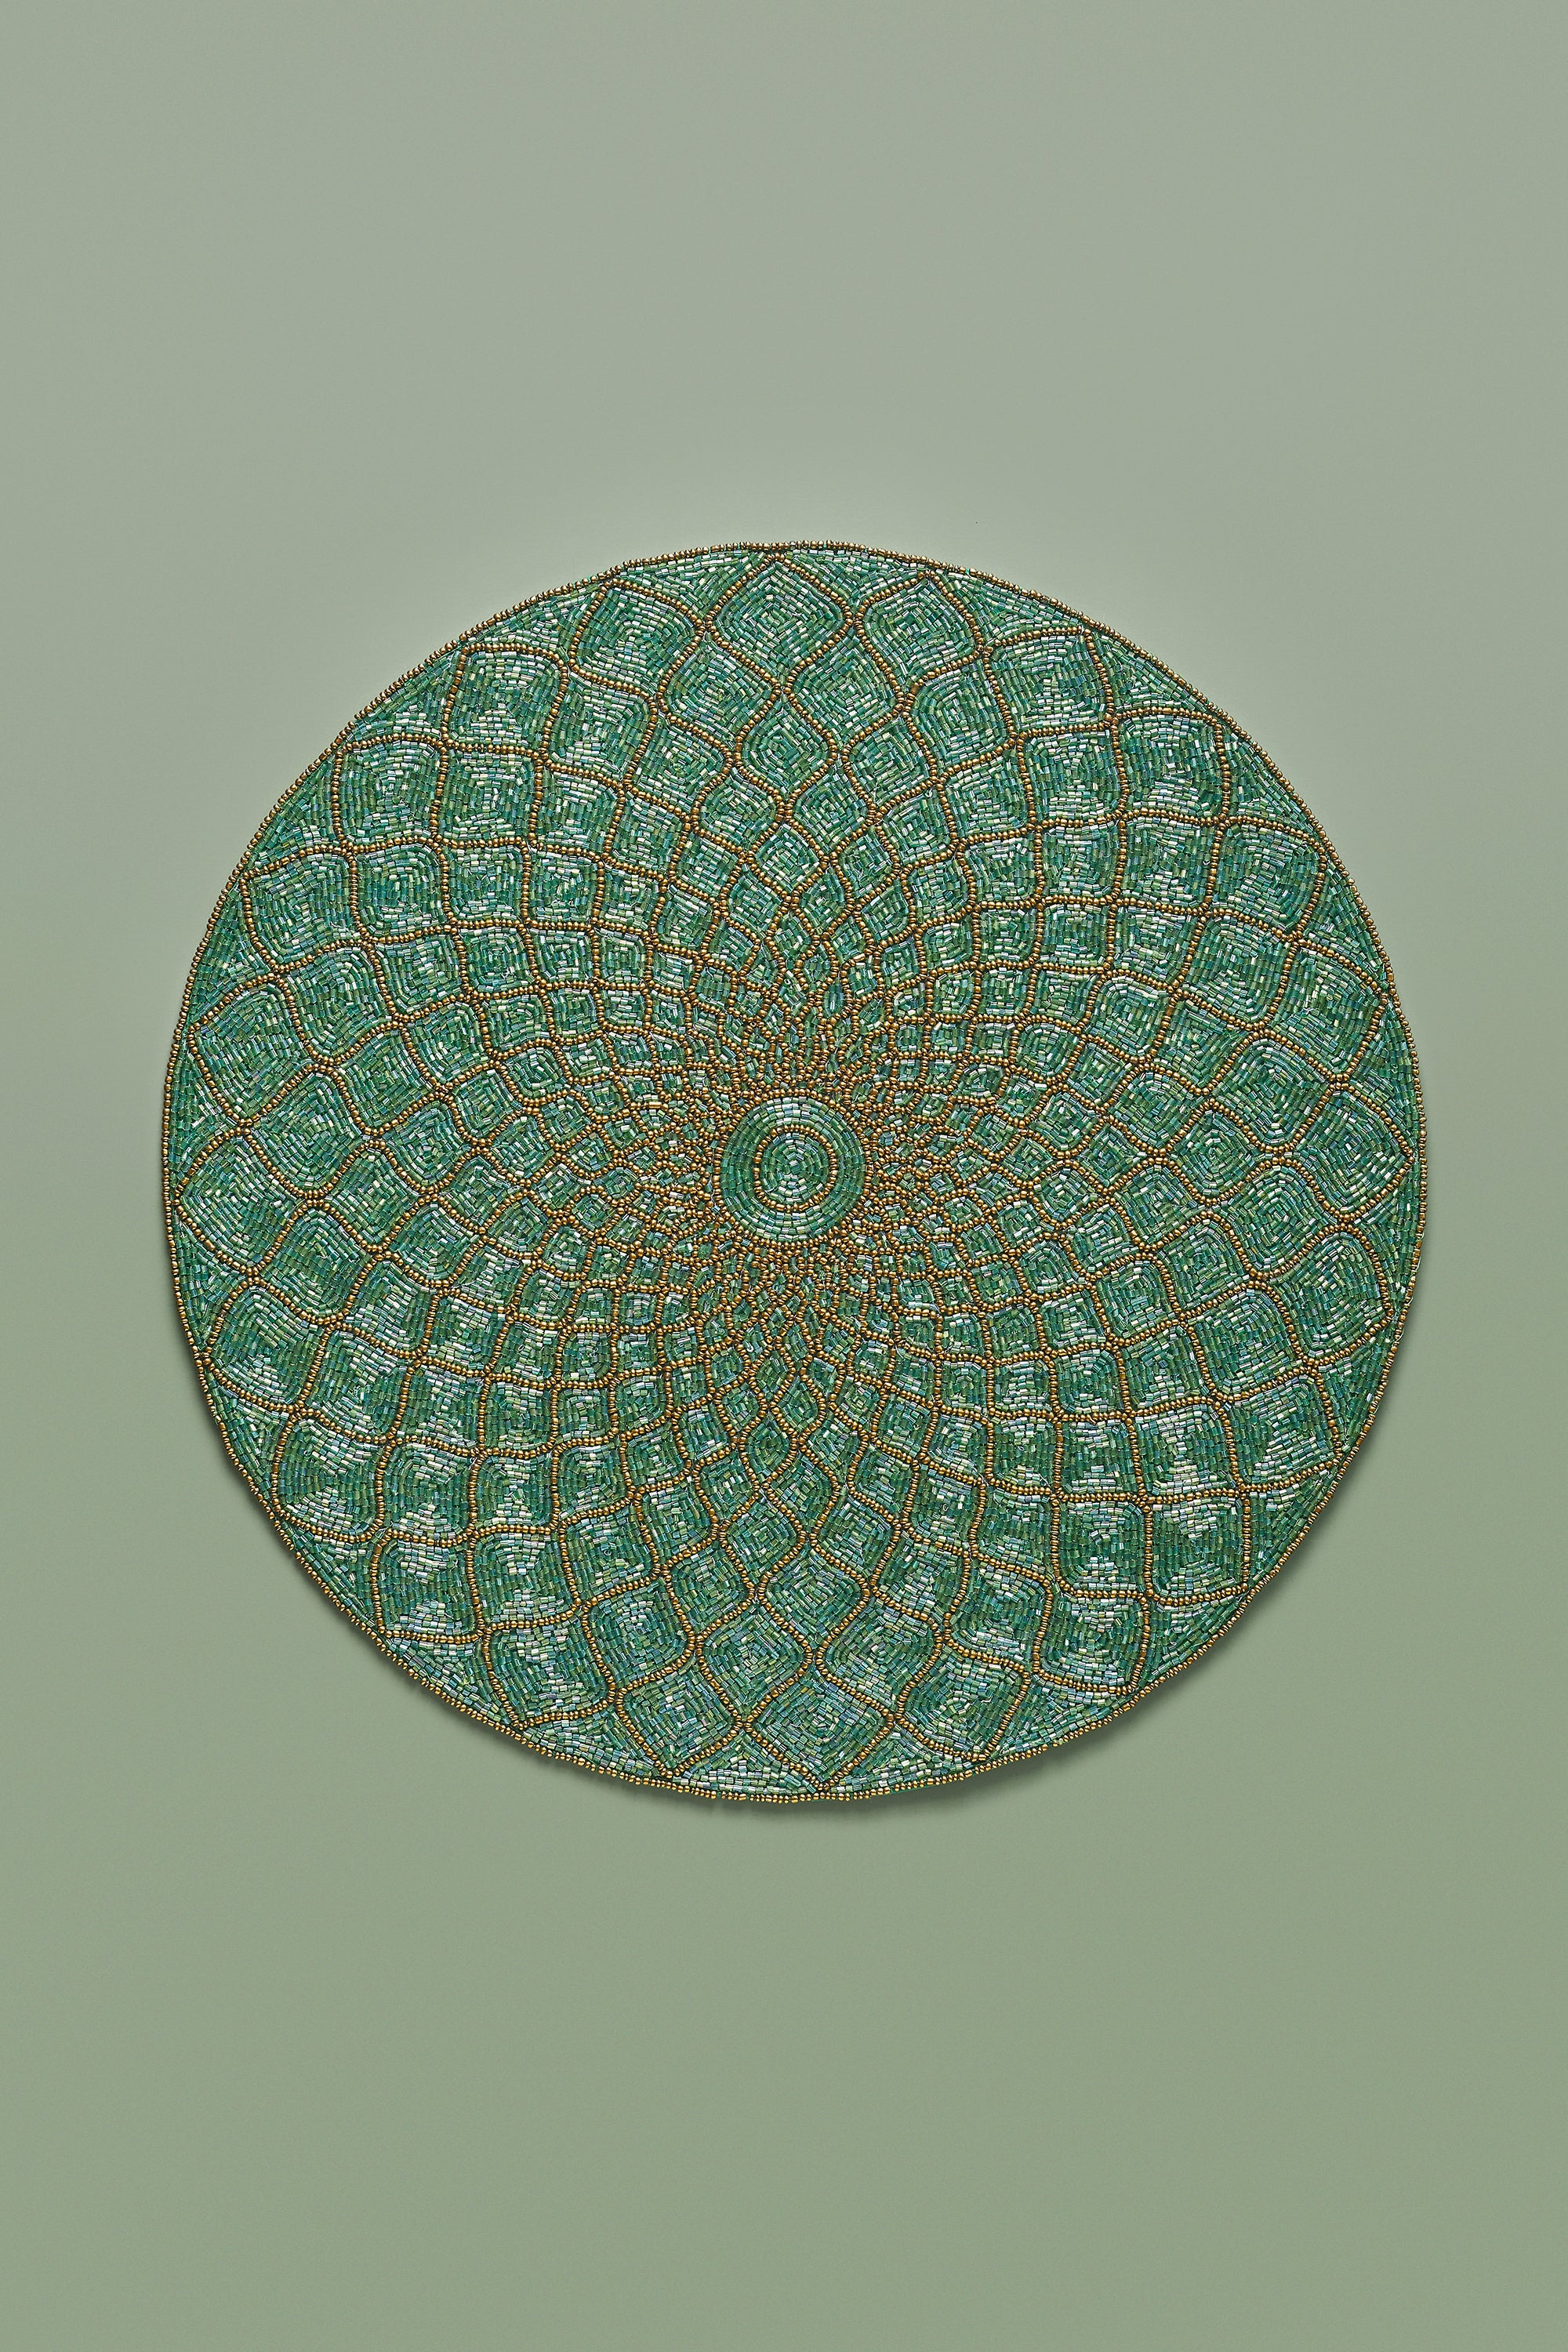 Handmade Round Beaded Placemat for Dining Table